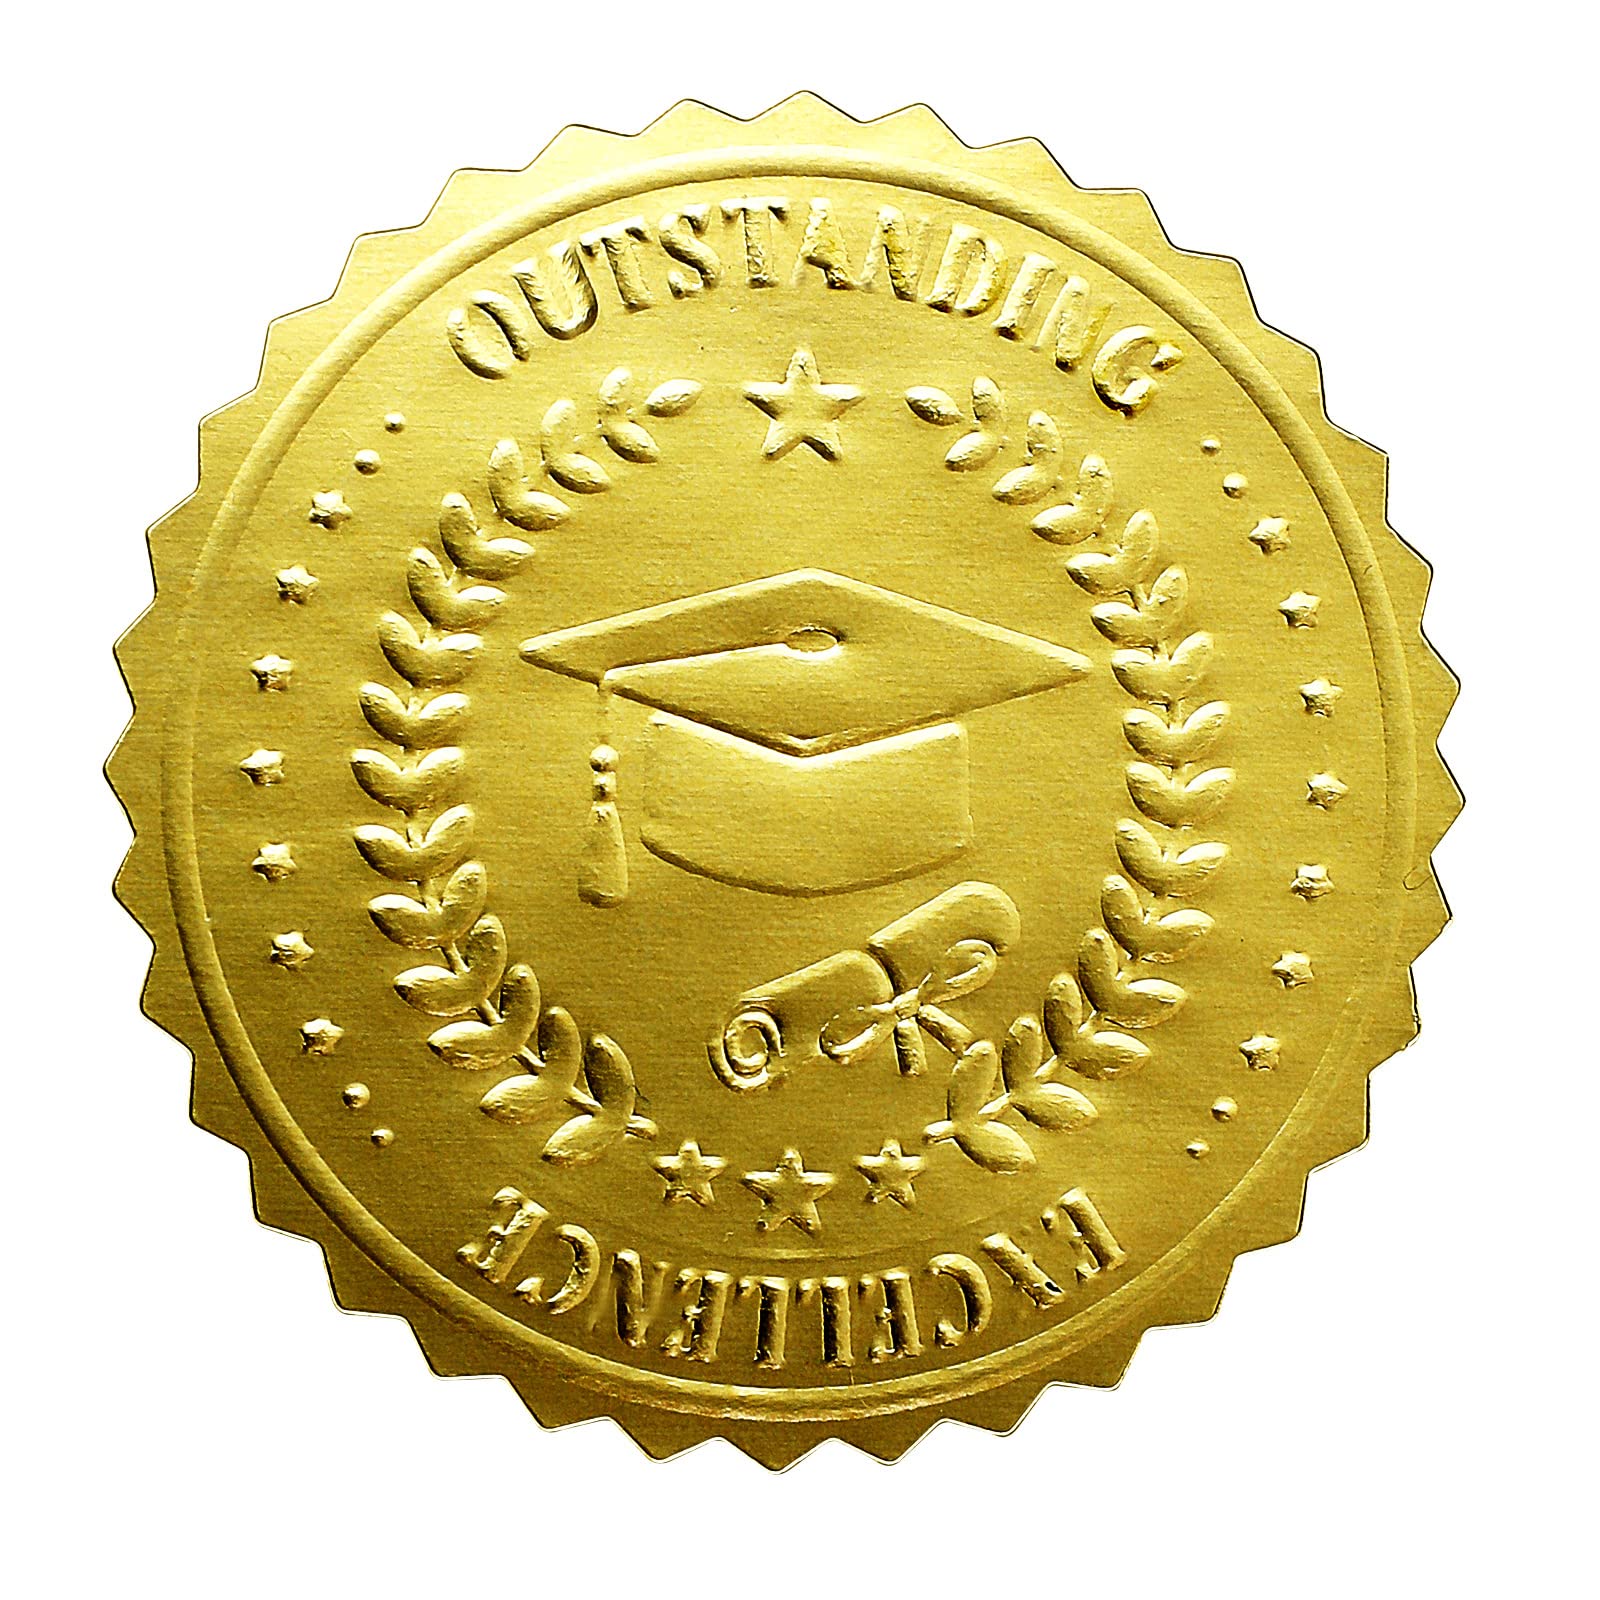 Certificate with a checkmark or seal